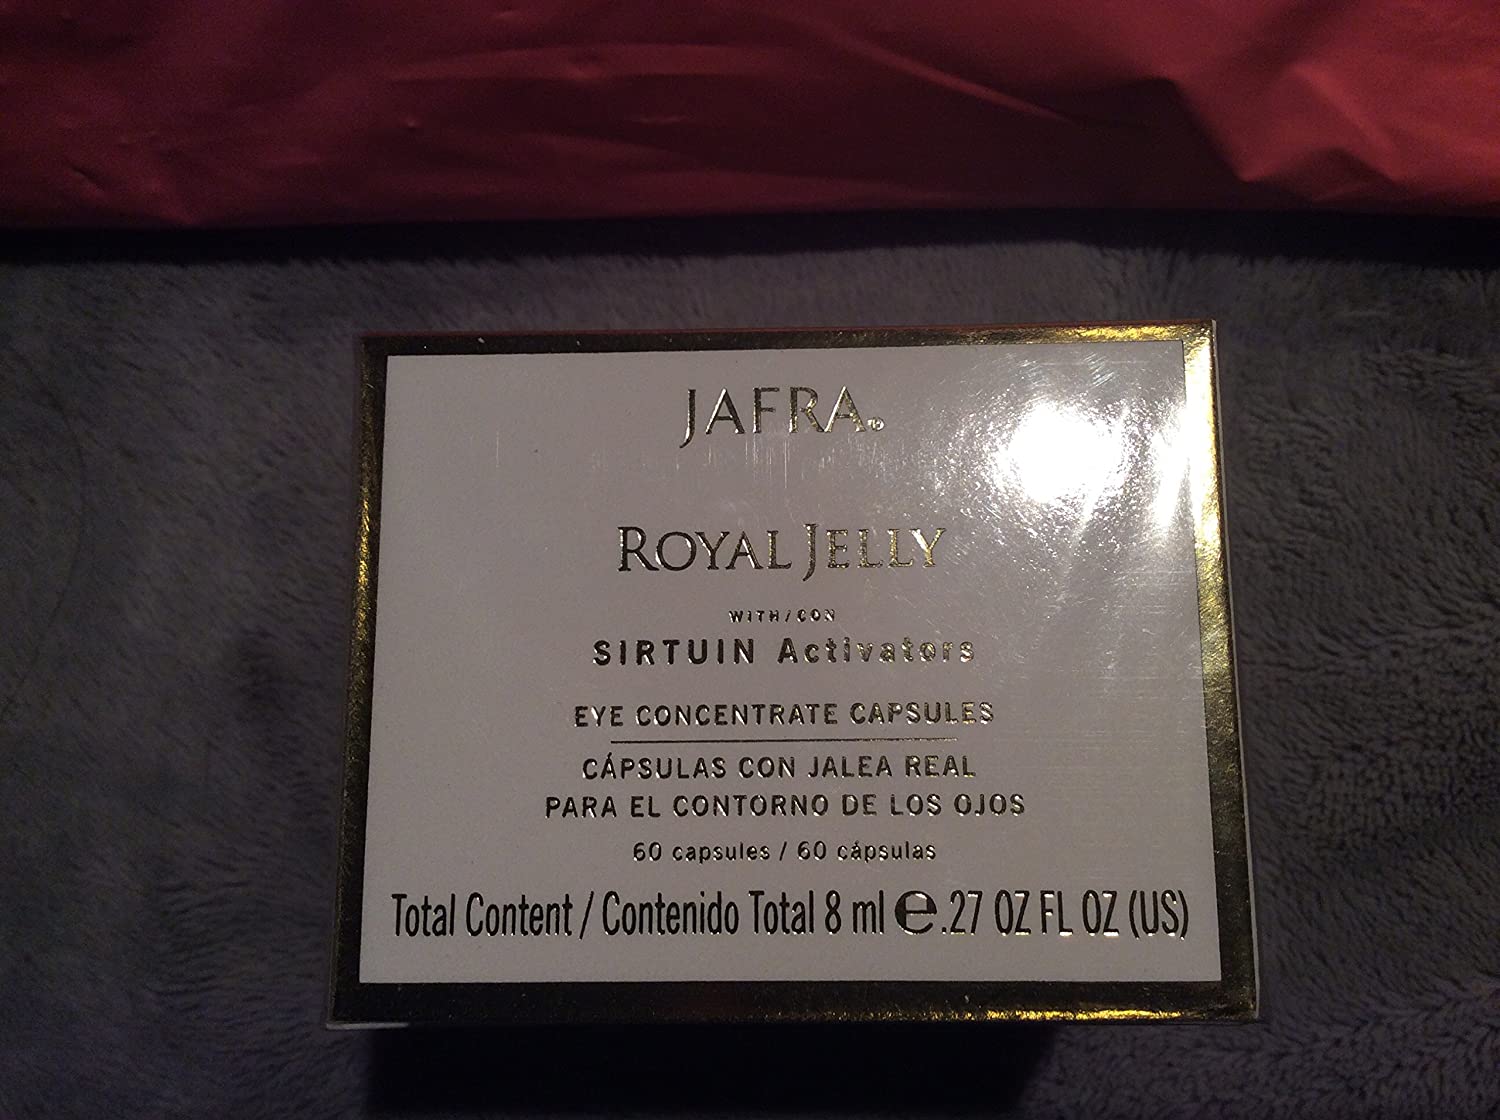 Jafra Royal Jelly Eye Concentrate Capsules 60 capsules